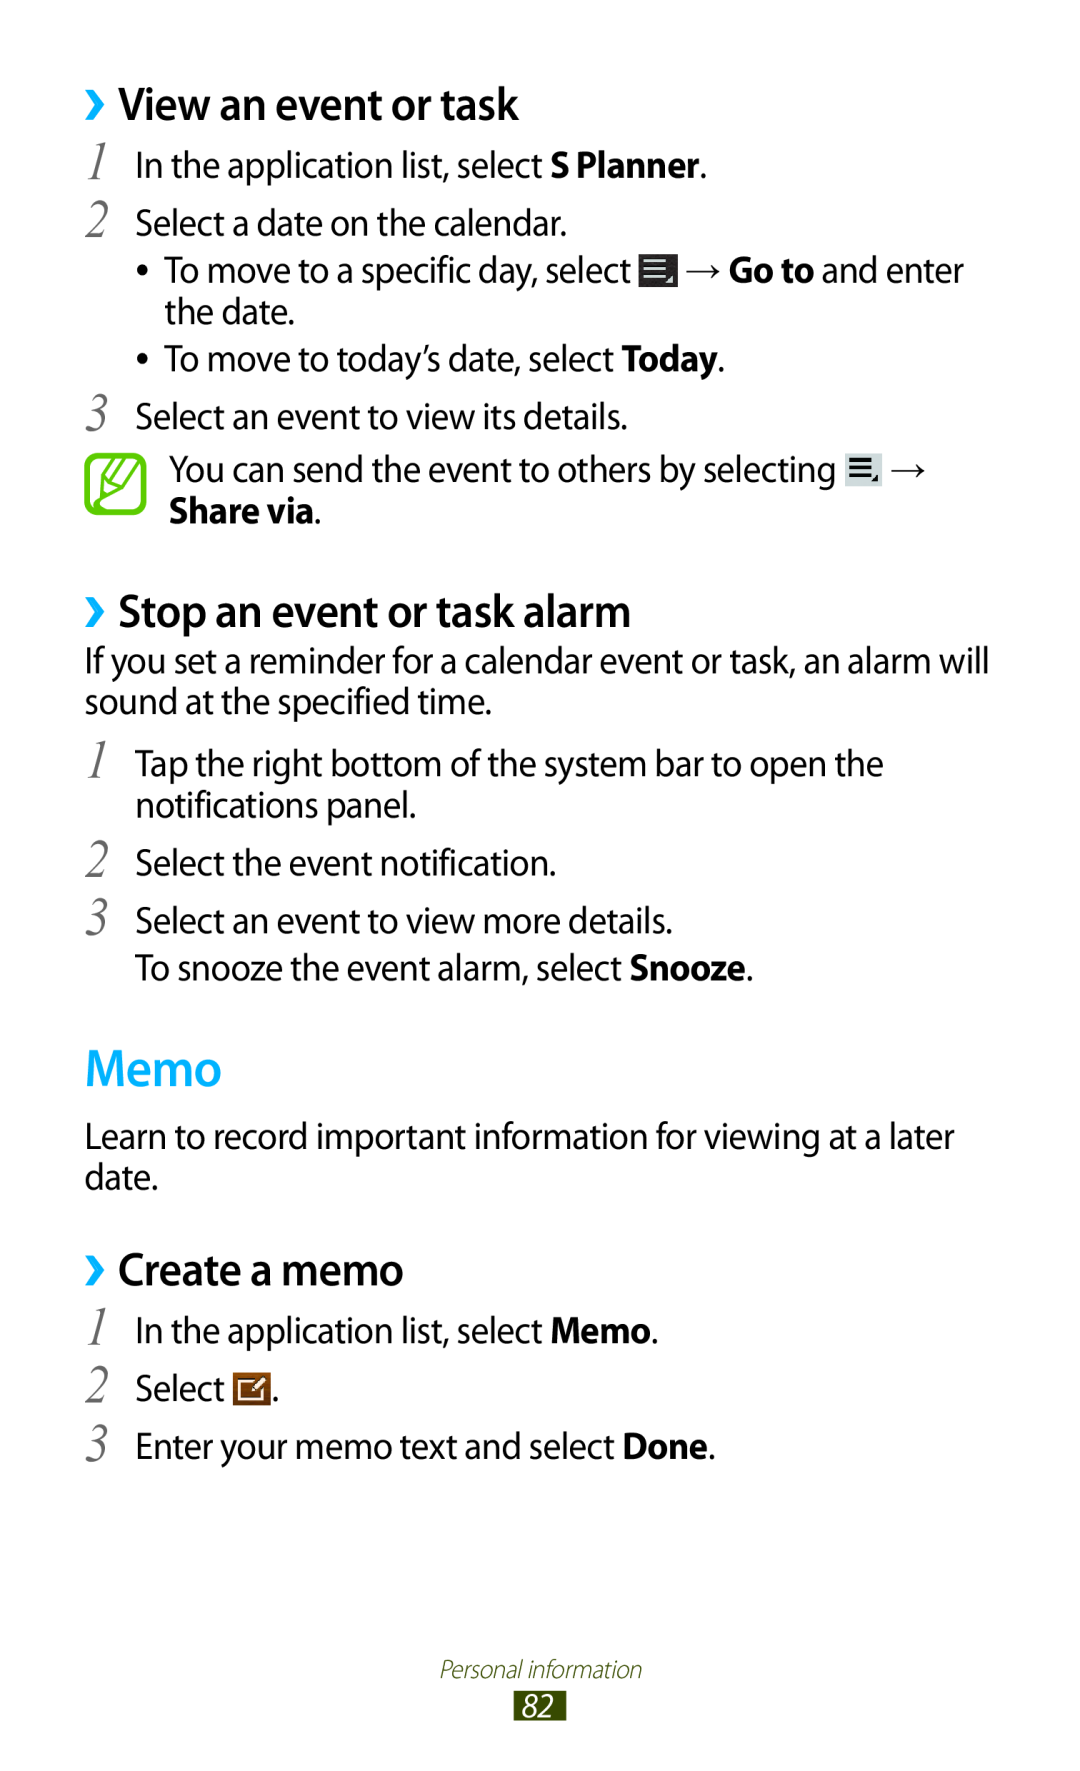 Samsung GT-P7500FKESKZ, GT-P7500UWEDBT manual Memo, ››View an event or task, ››Stop an event or task alarm, ››Create a memo 